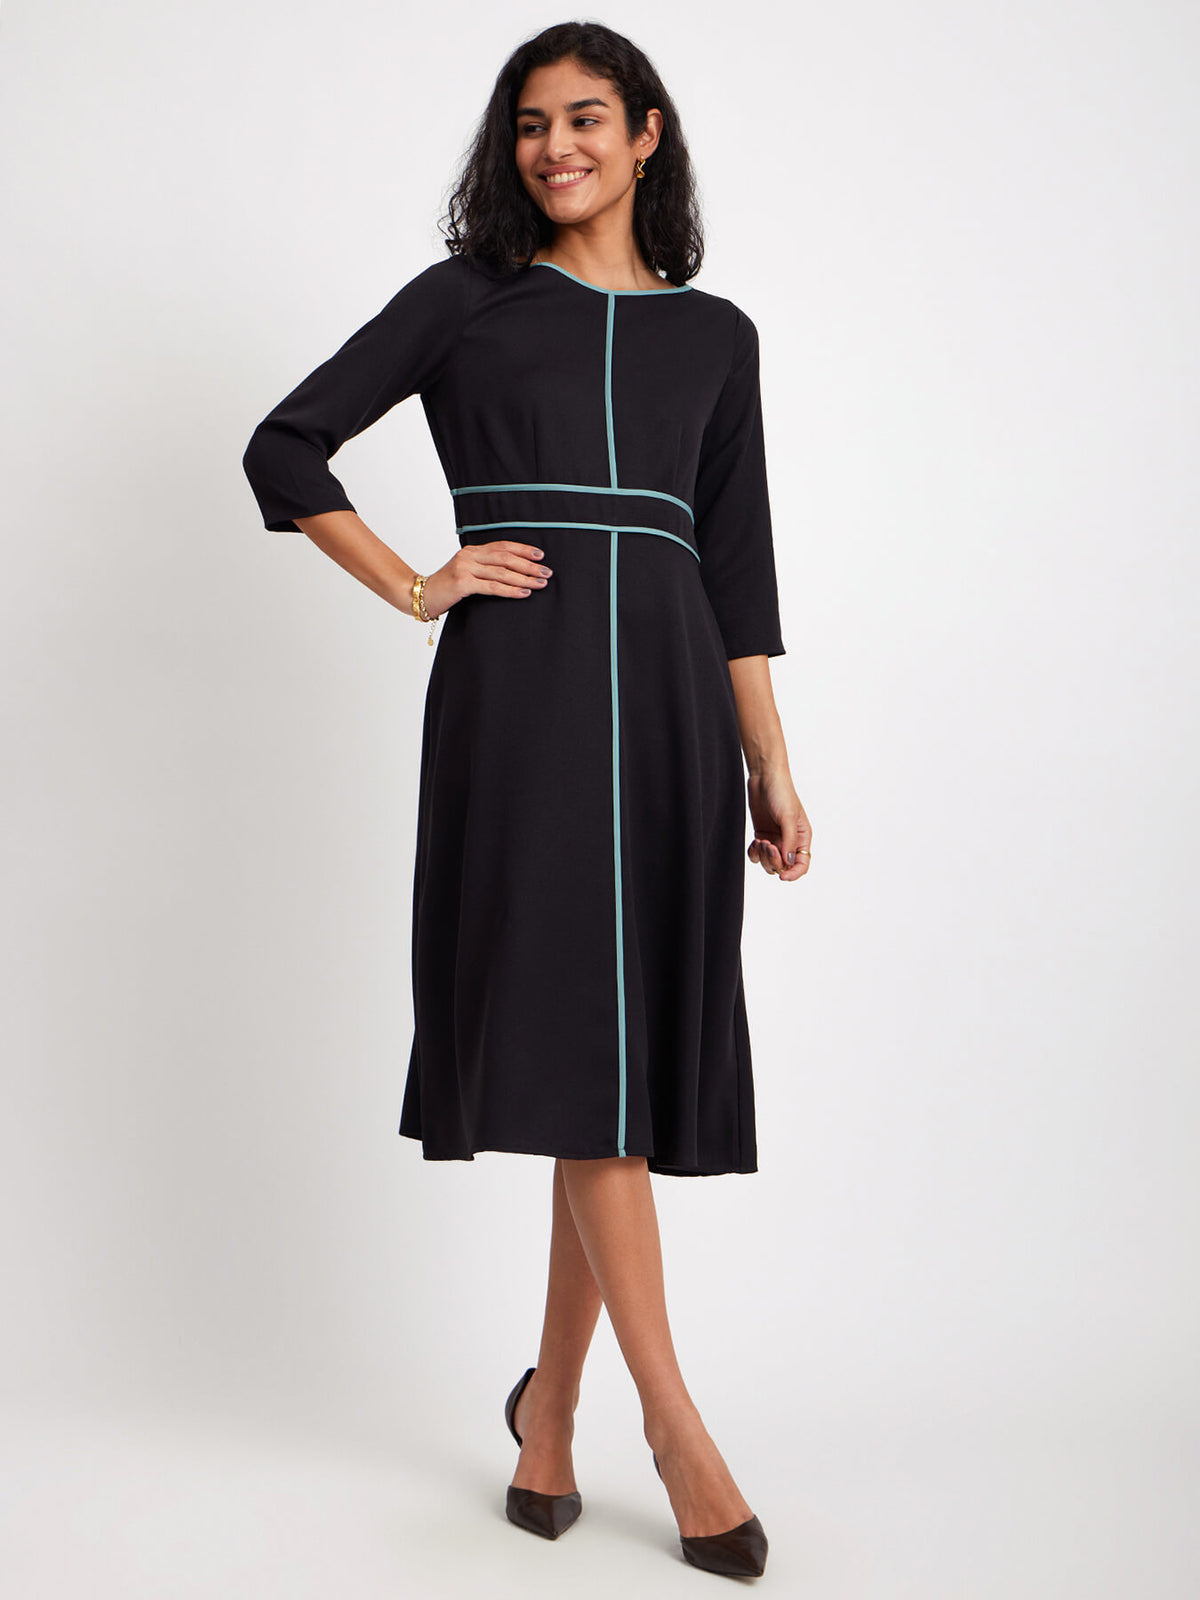 Colour Block Solid Dress - Black And Sap Green